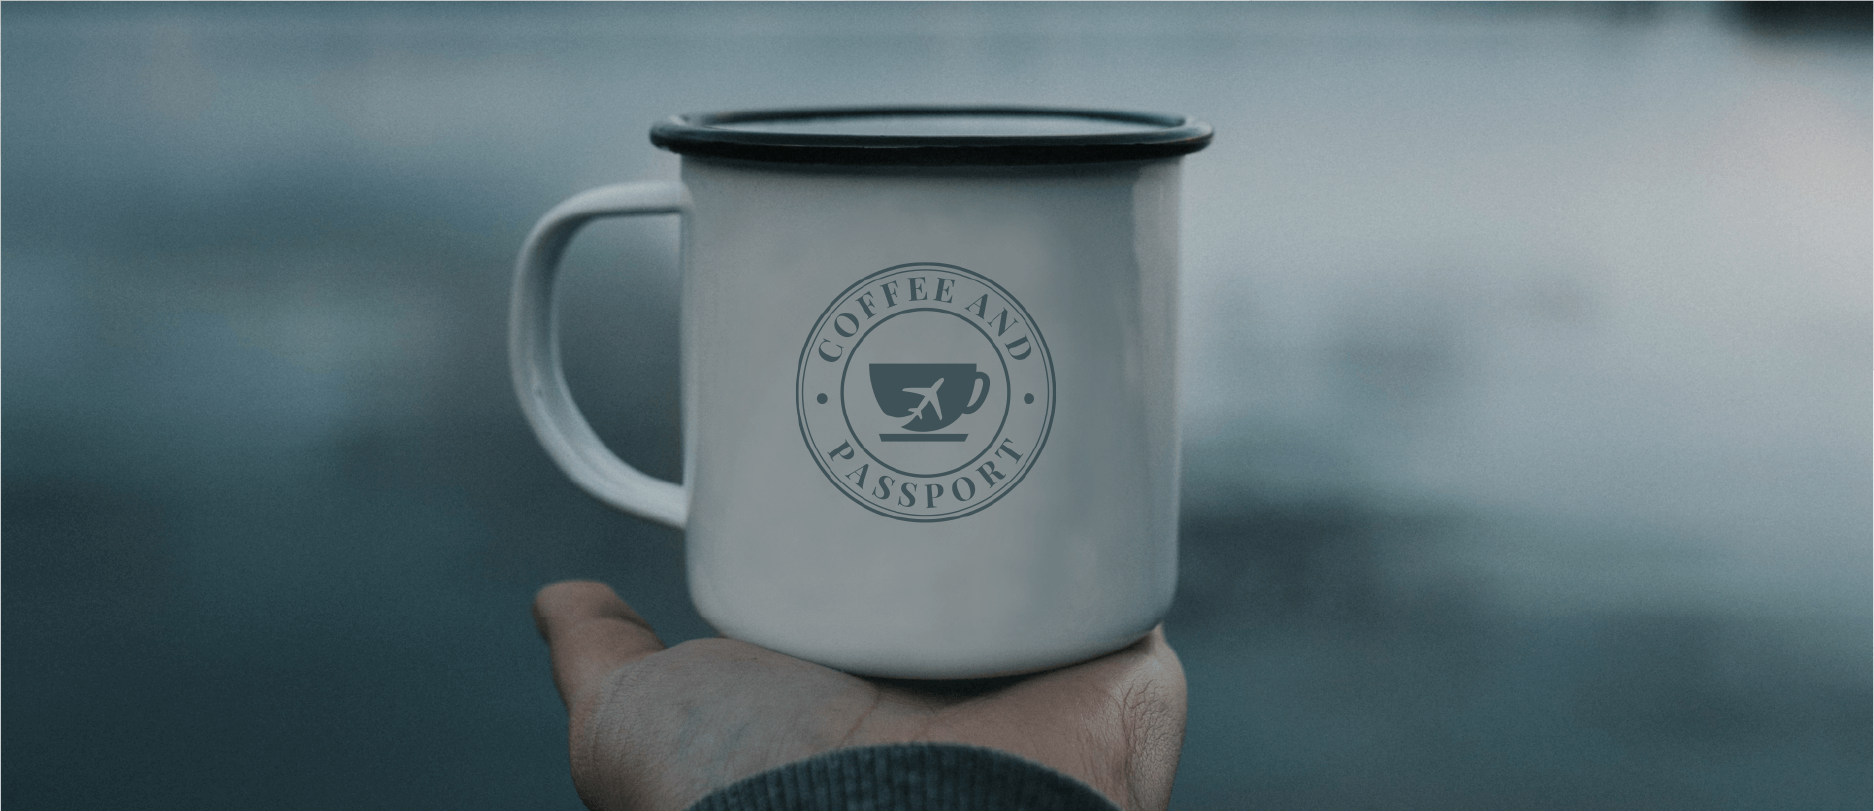 Brand Identity for Coffee and Passport on a mug, held in the palm of someone's hand on the shore of a lake.